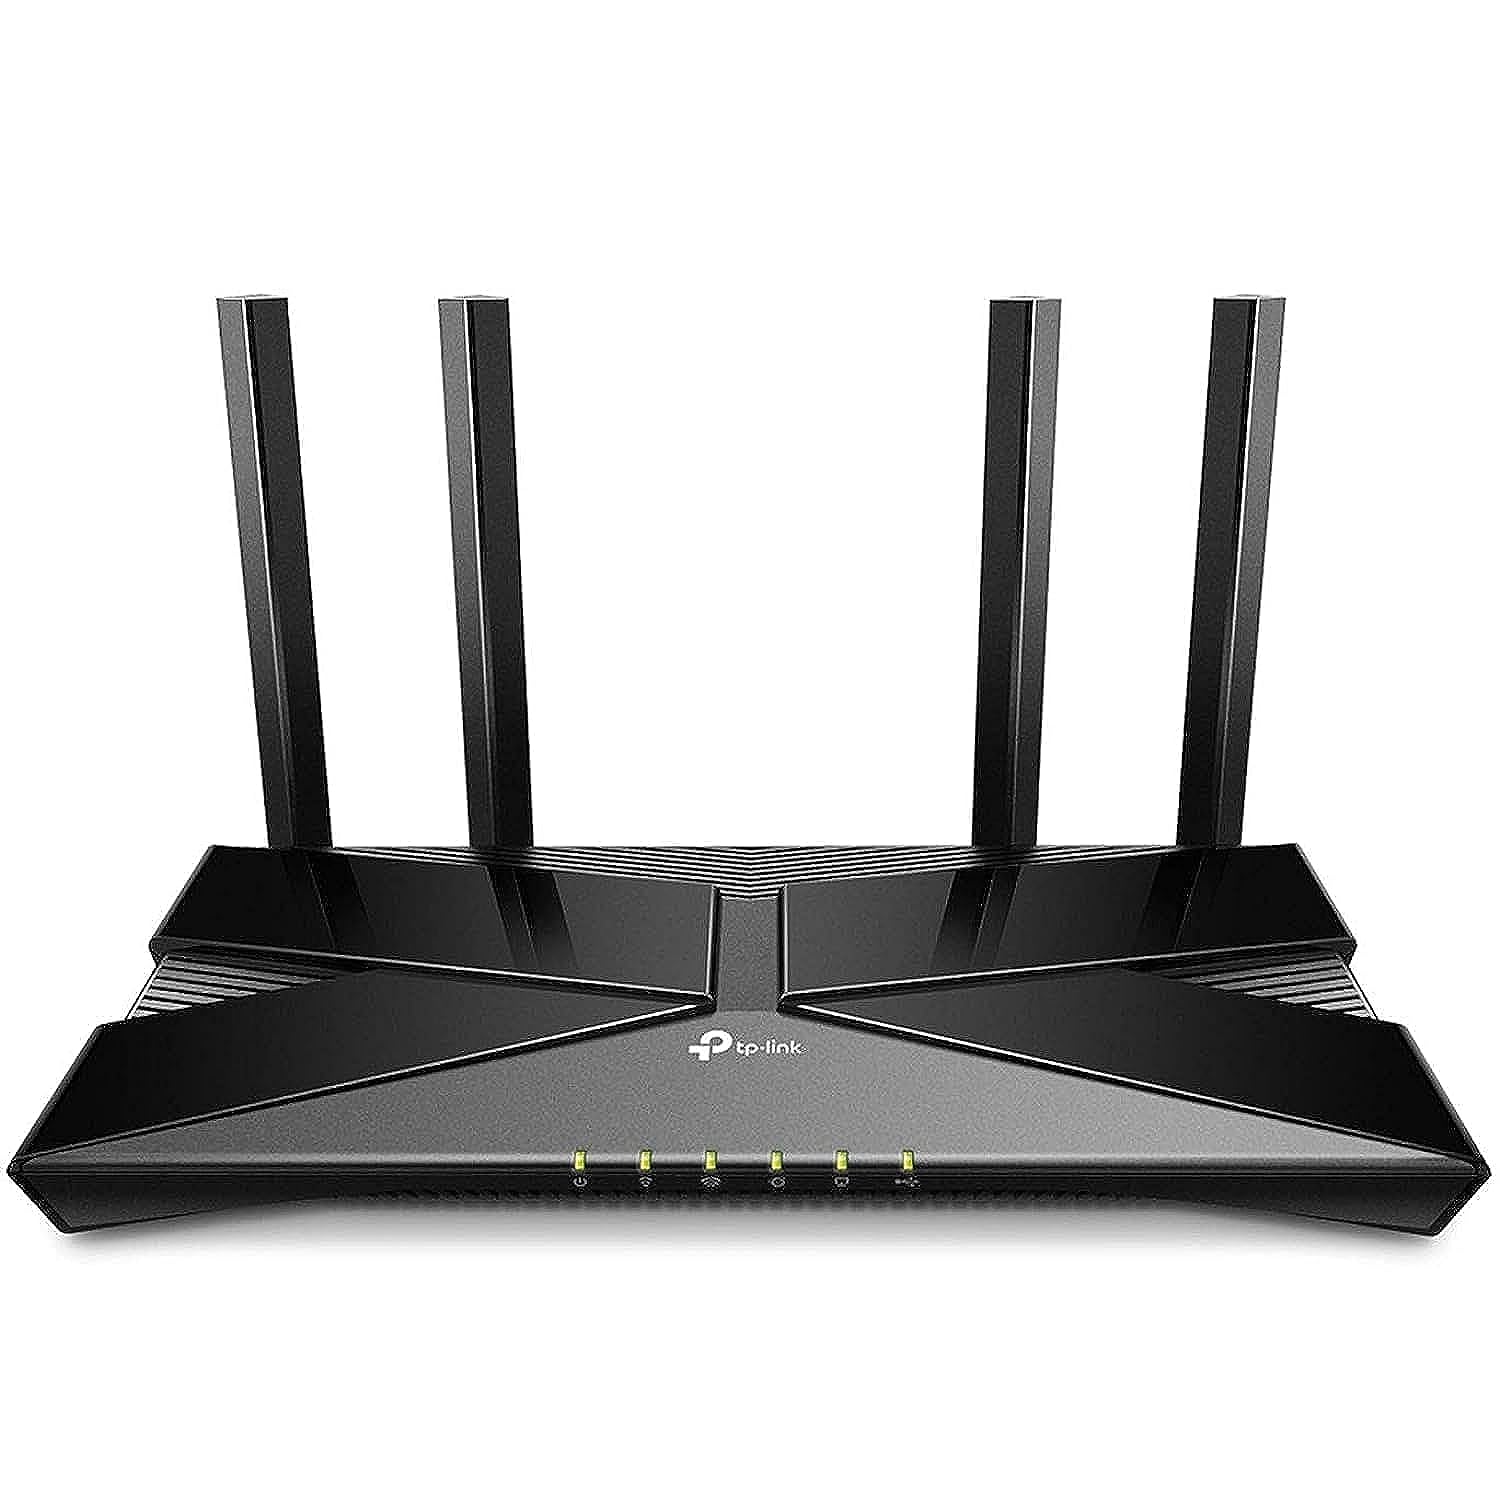 TP-Link Smart WiFi 6 Router (Archer AX10) – 802.11ax Router, 4 Gigabit LAN Ports, Dual Band AX Router,Beamforming,OFDMA, MU-M…